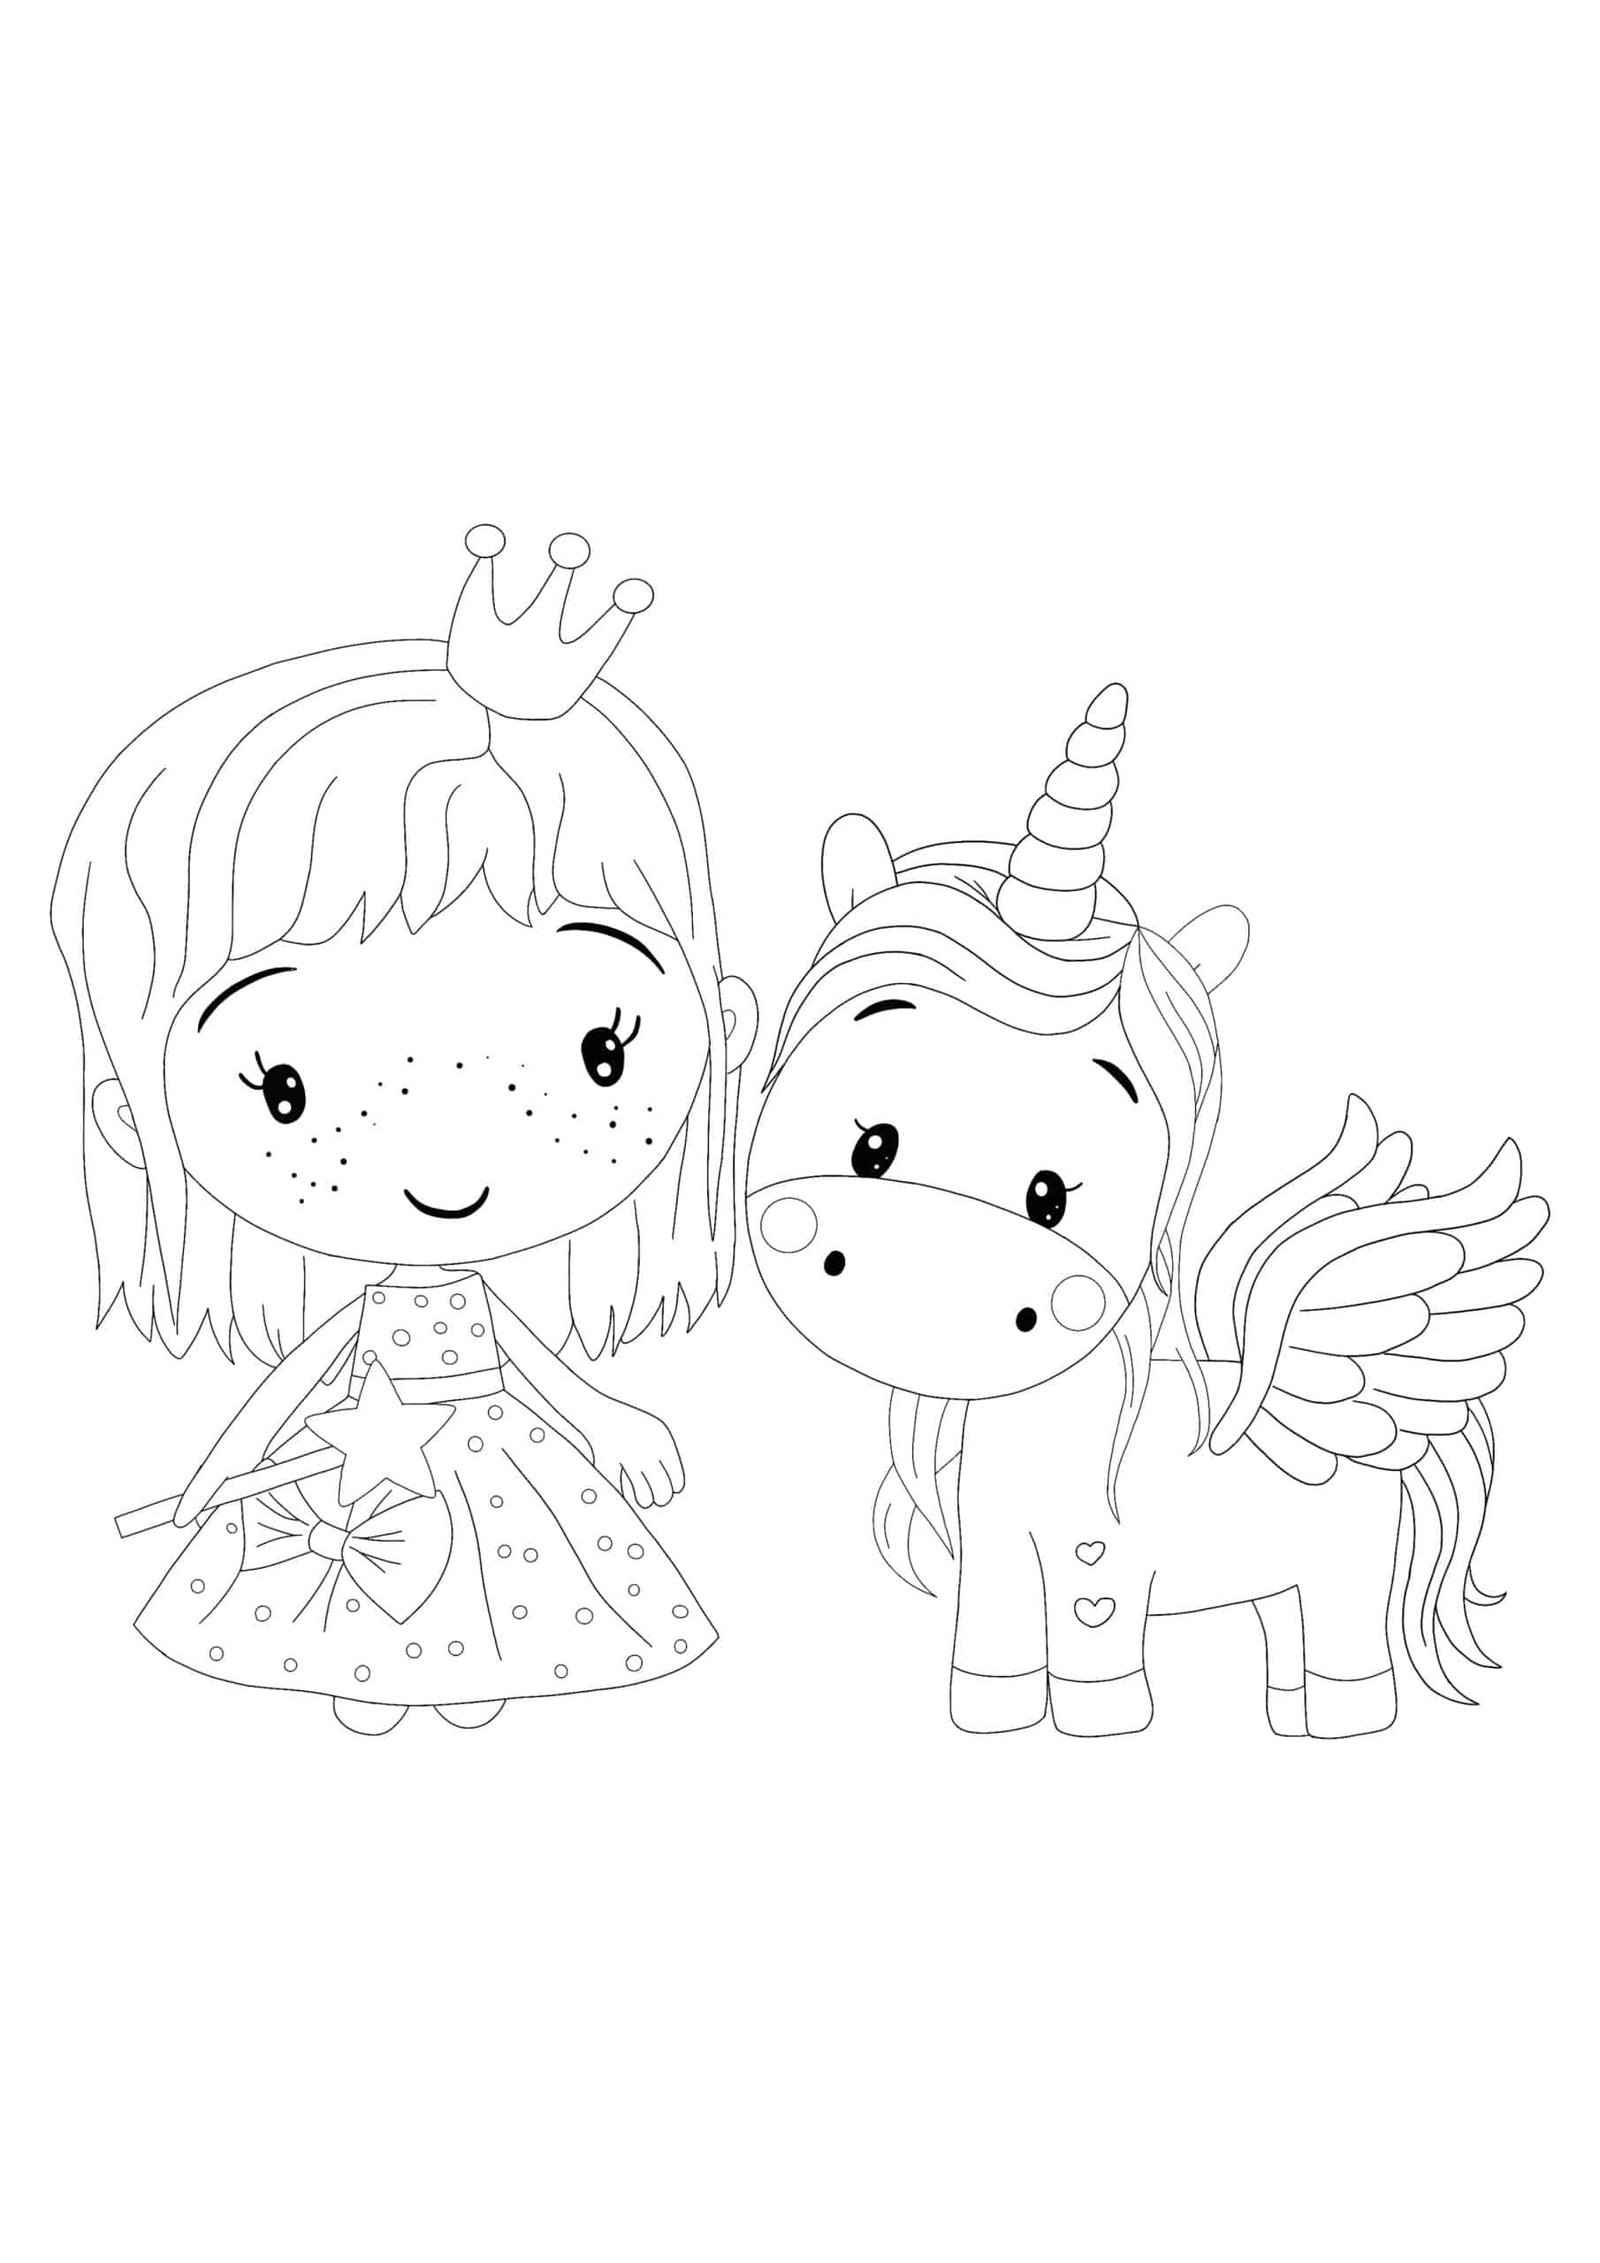 Princess and unicorn coloring pages